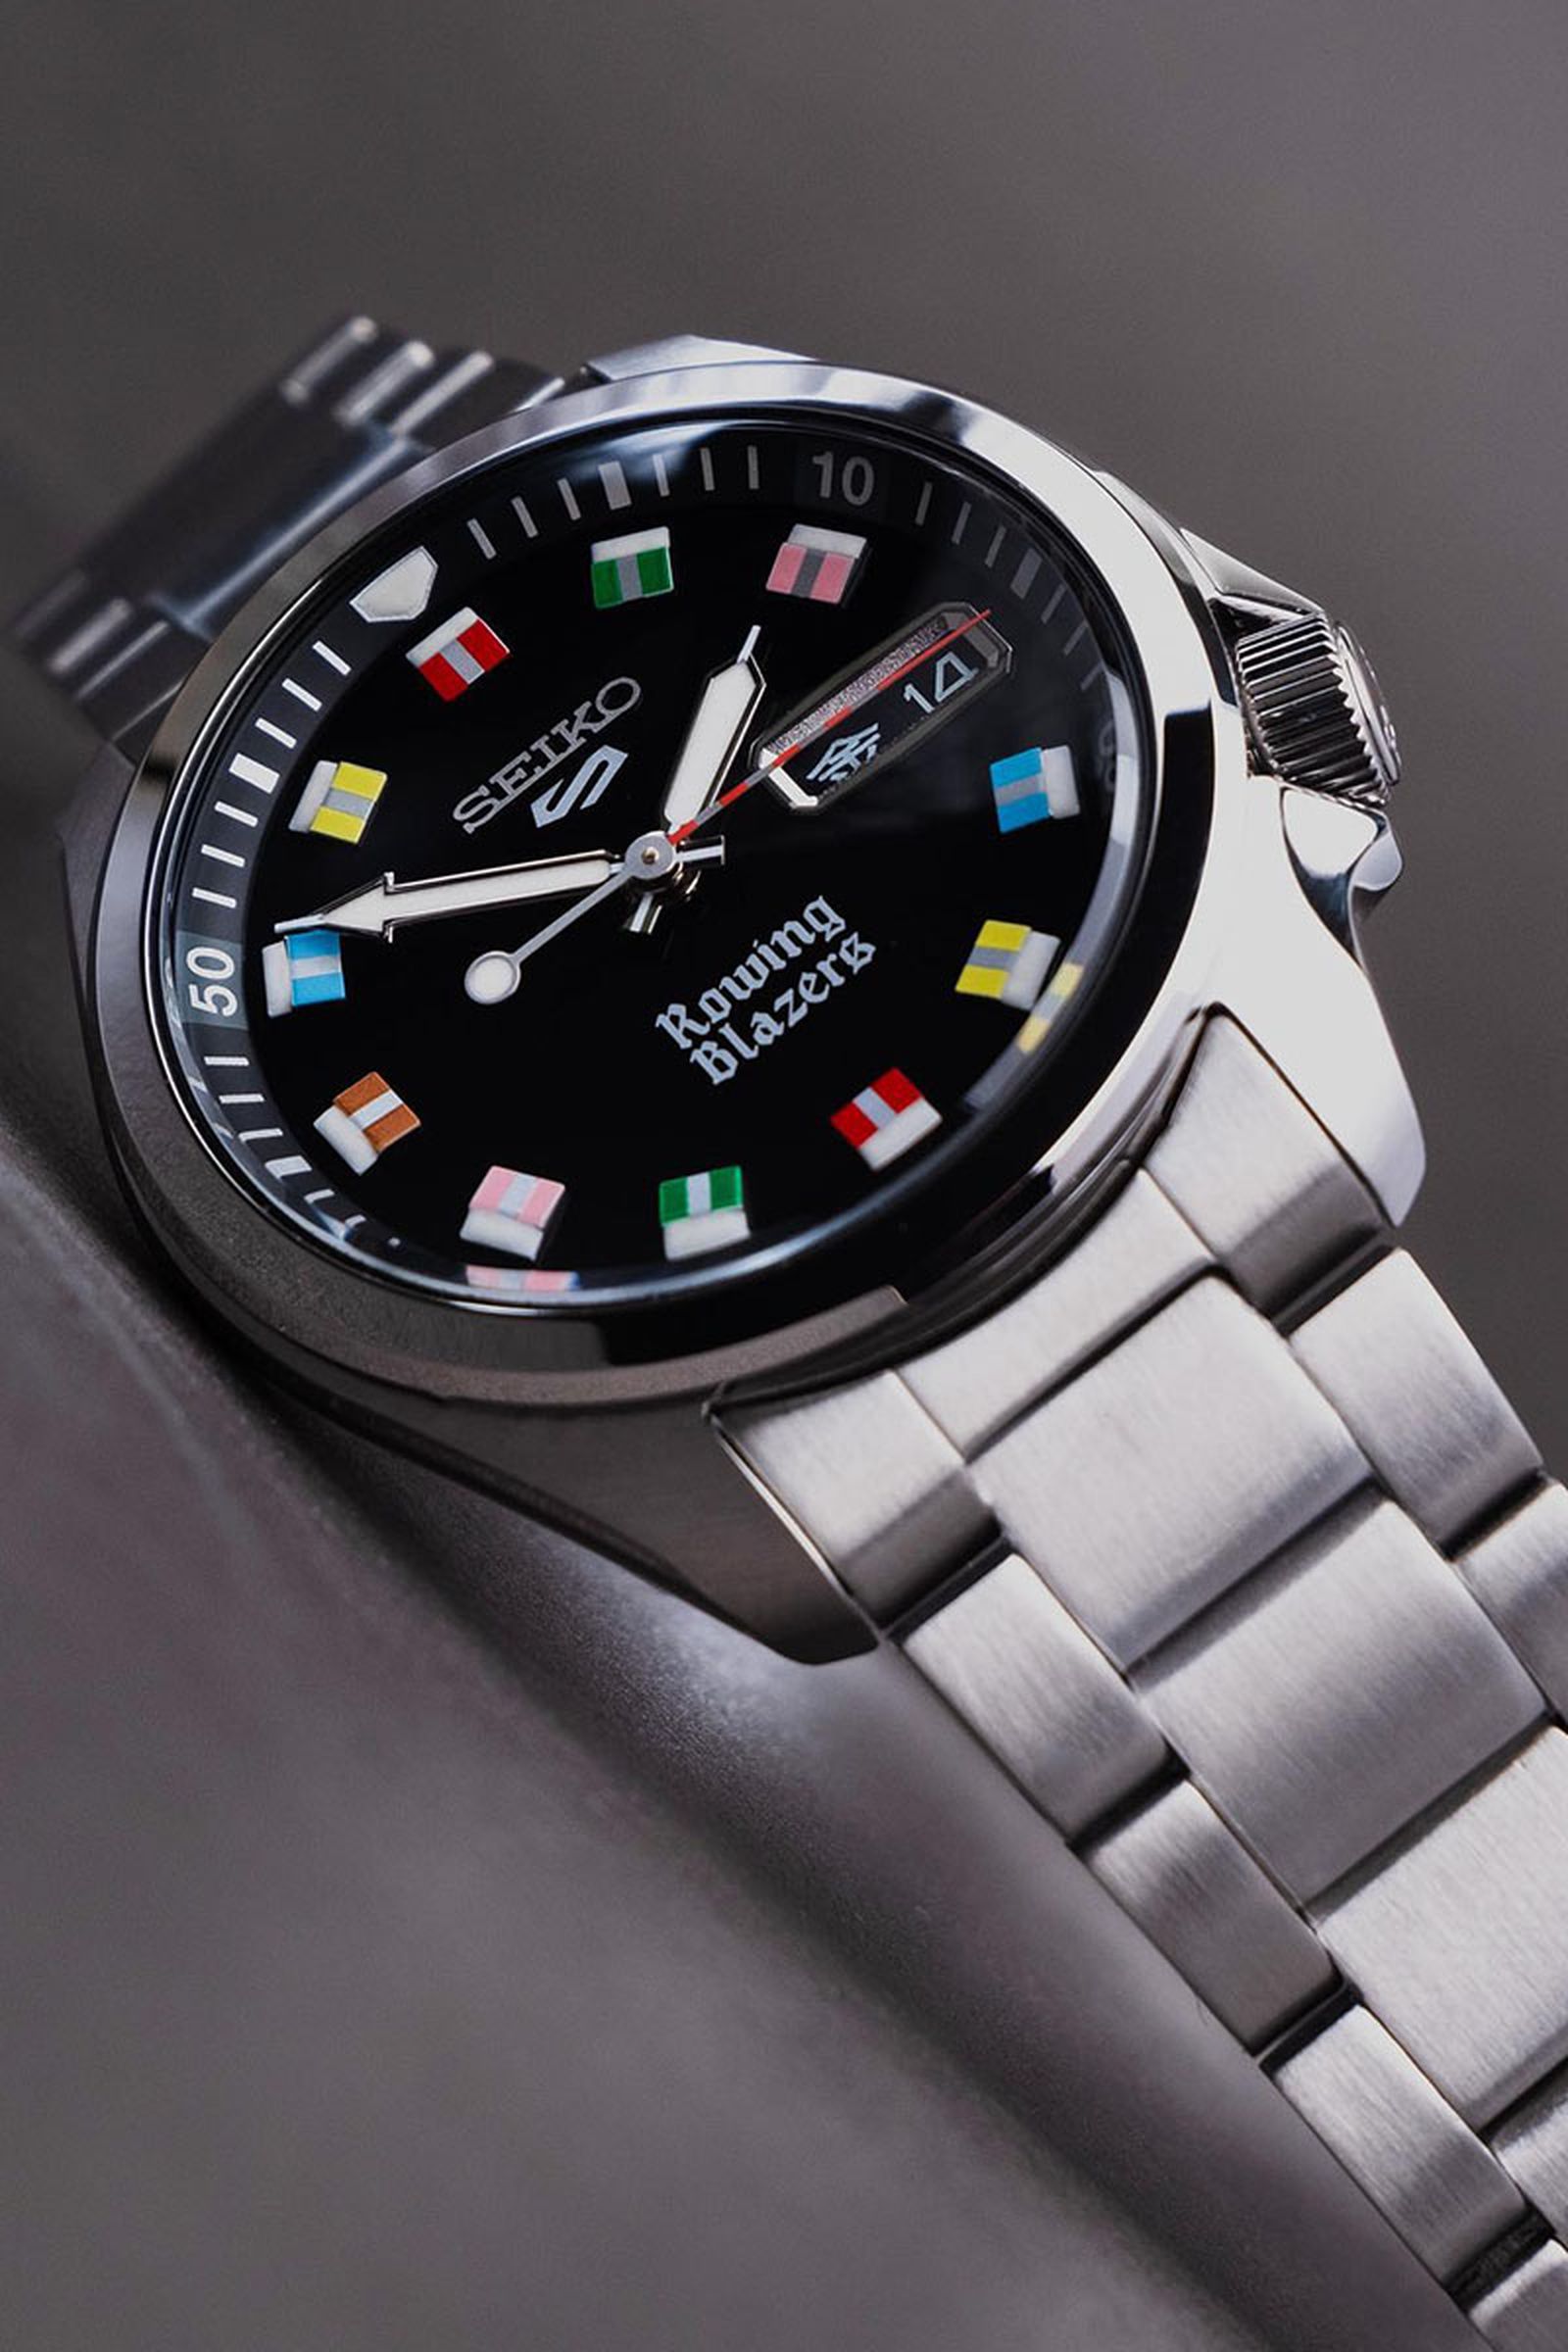 Rowing Blazers & Seiko Launch Four-Piece Watch Collection